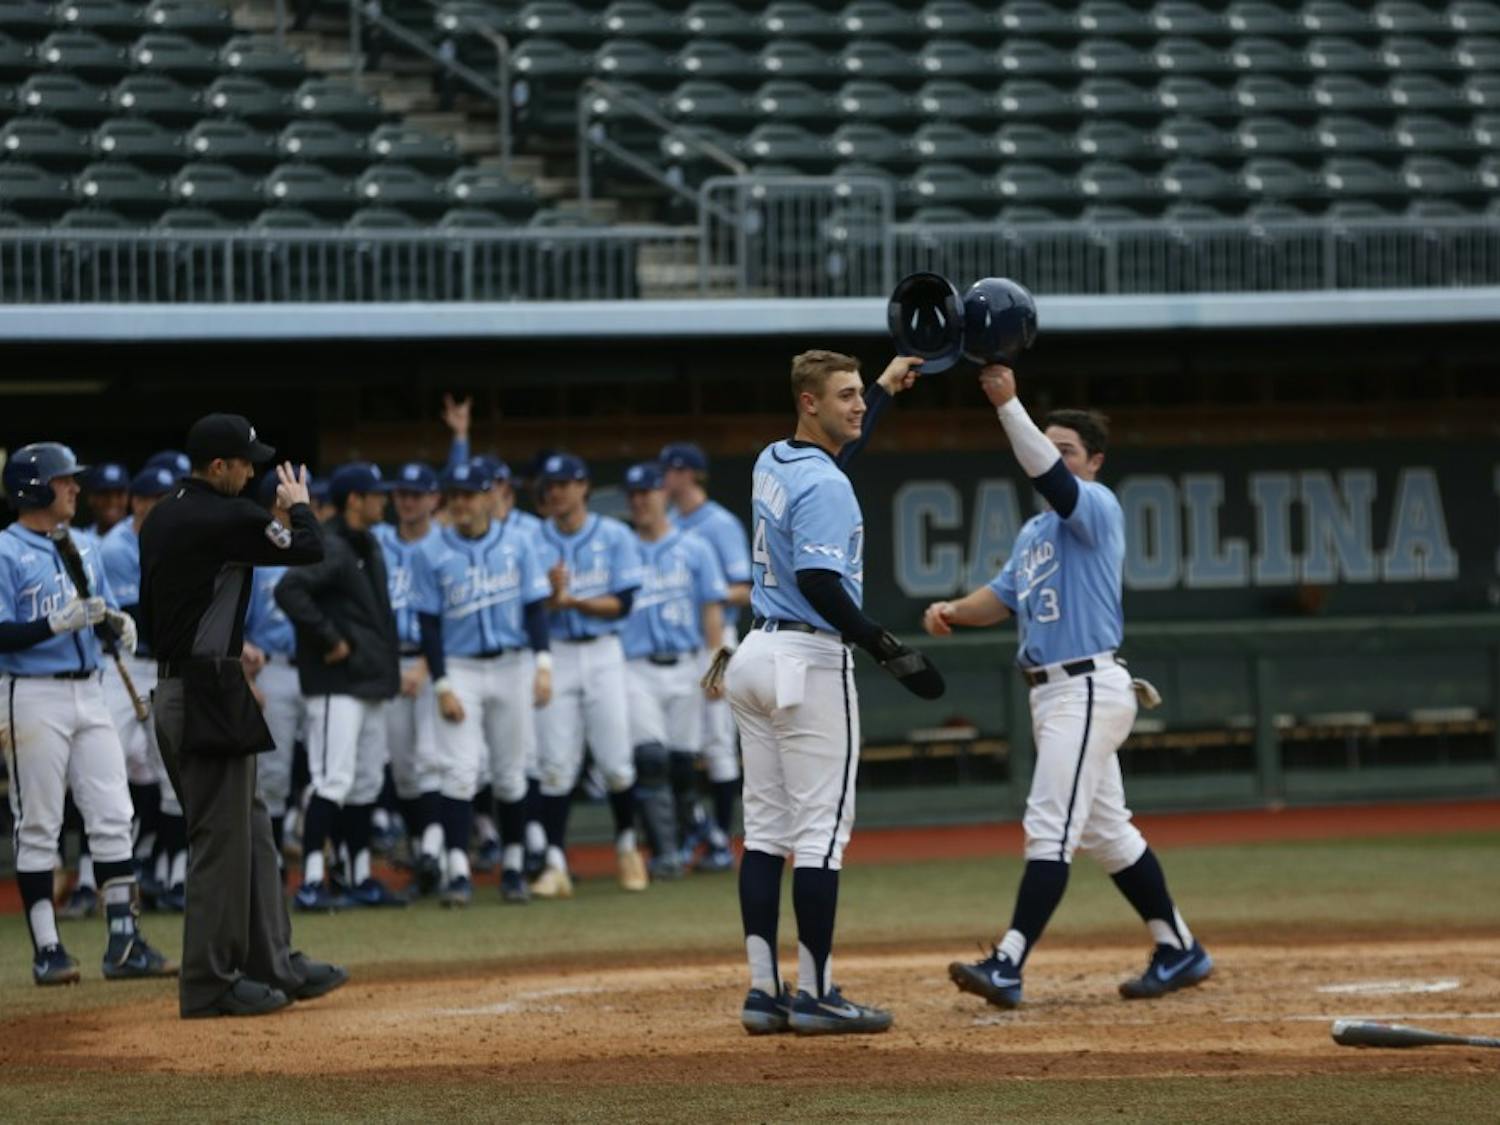 Brandon Martorano (4) and Dylan Harris (3) celebrate after a home run by Michael Busch in UNC's 11-8 loss over VCU on Wednesday, Feb. 27, 2019.